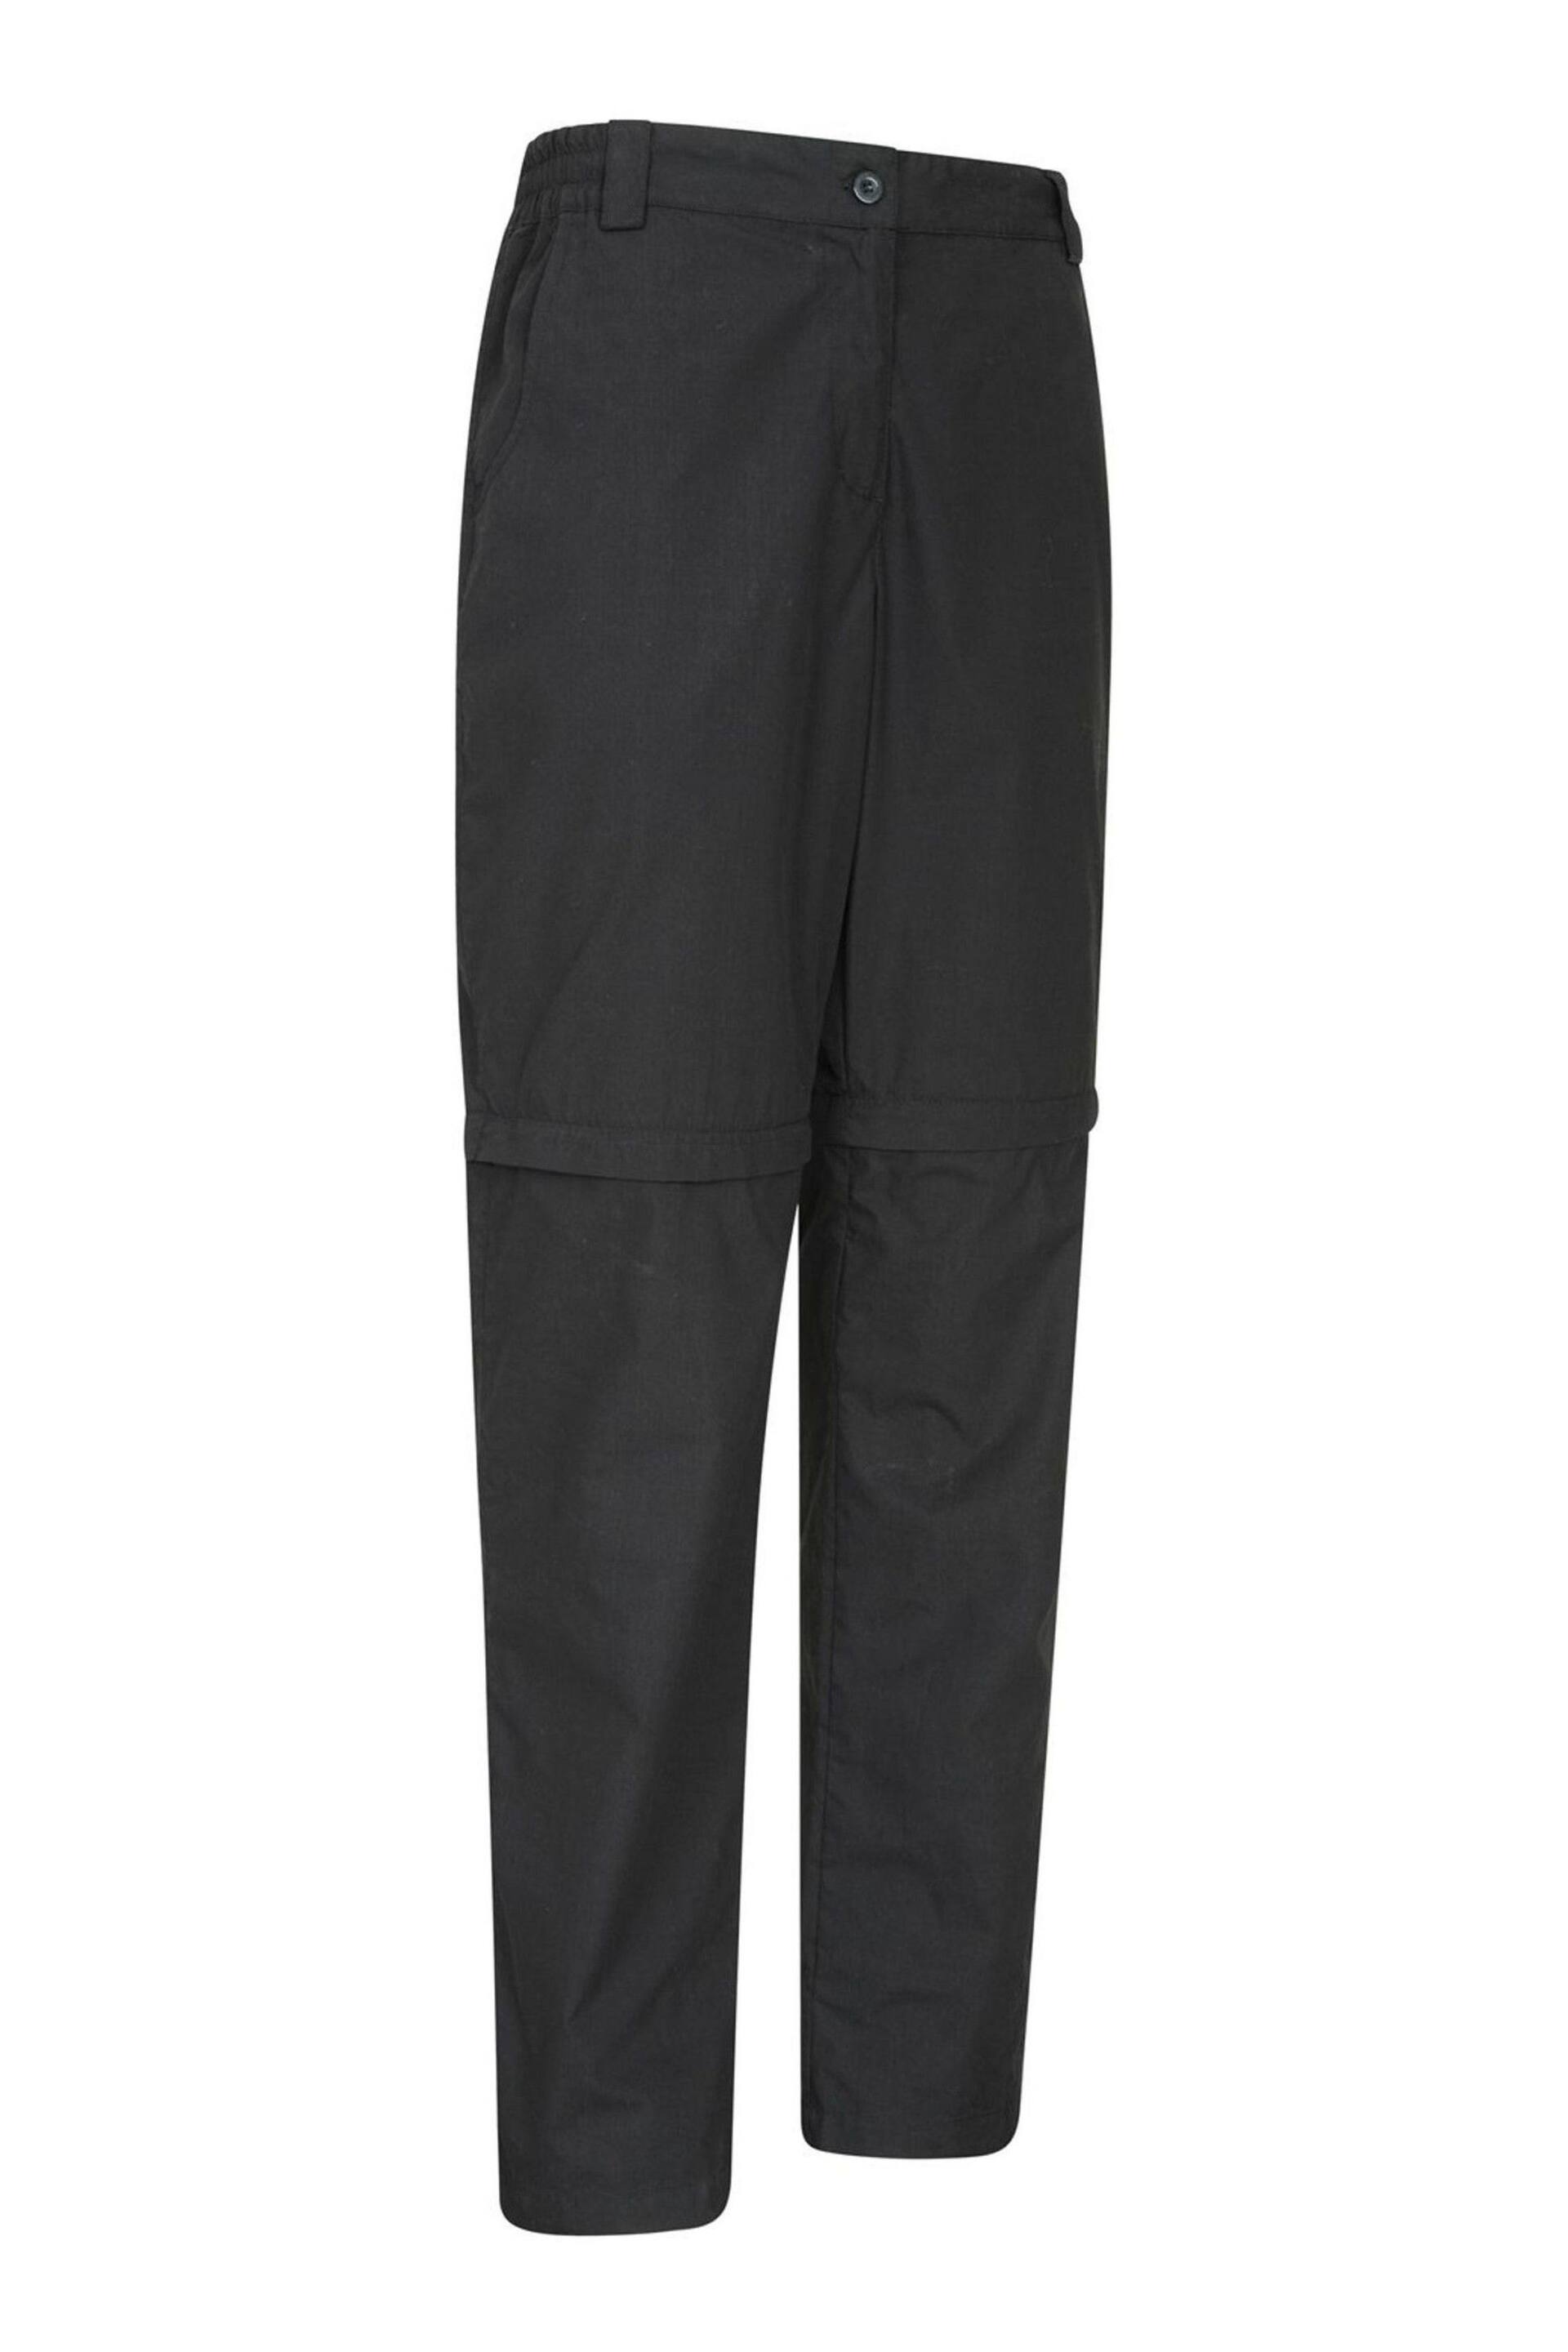 Mountain Warehouse Black Quest Womens Zip-Off Hiking Trousers - Image 4 of 4